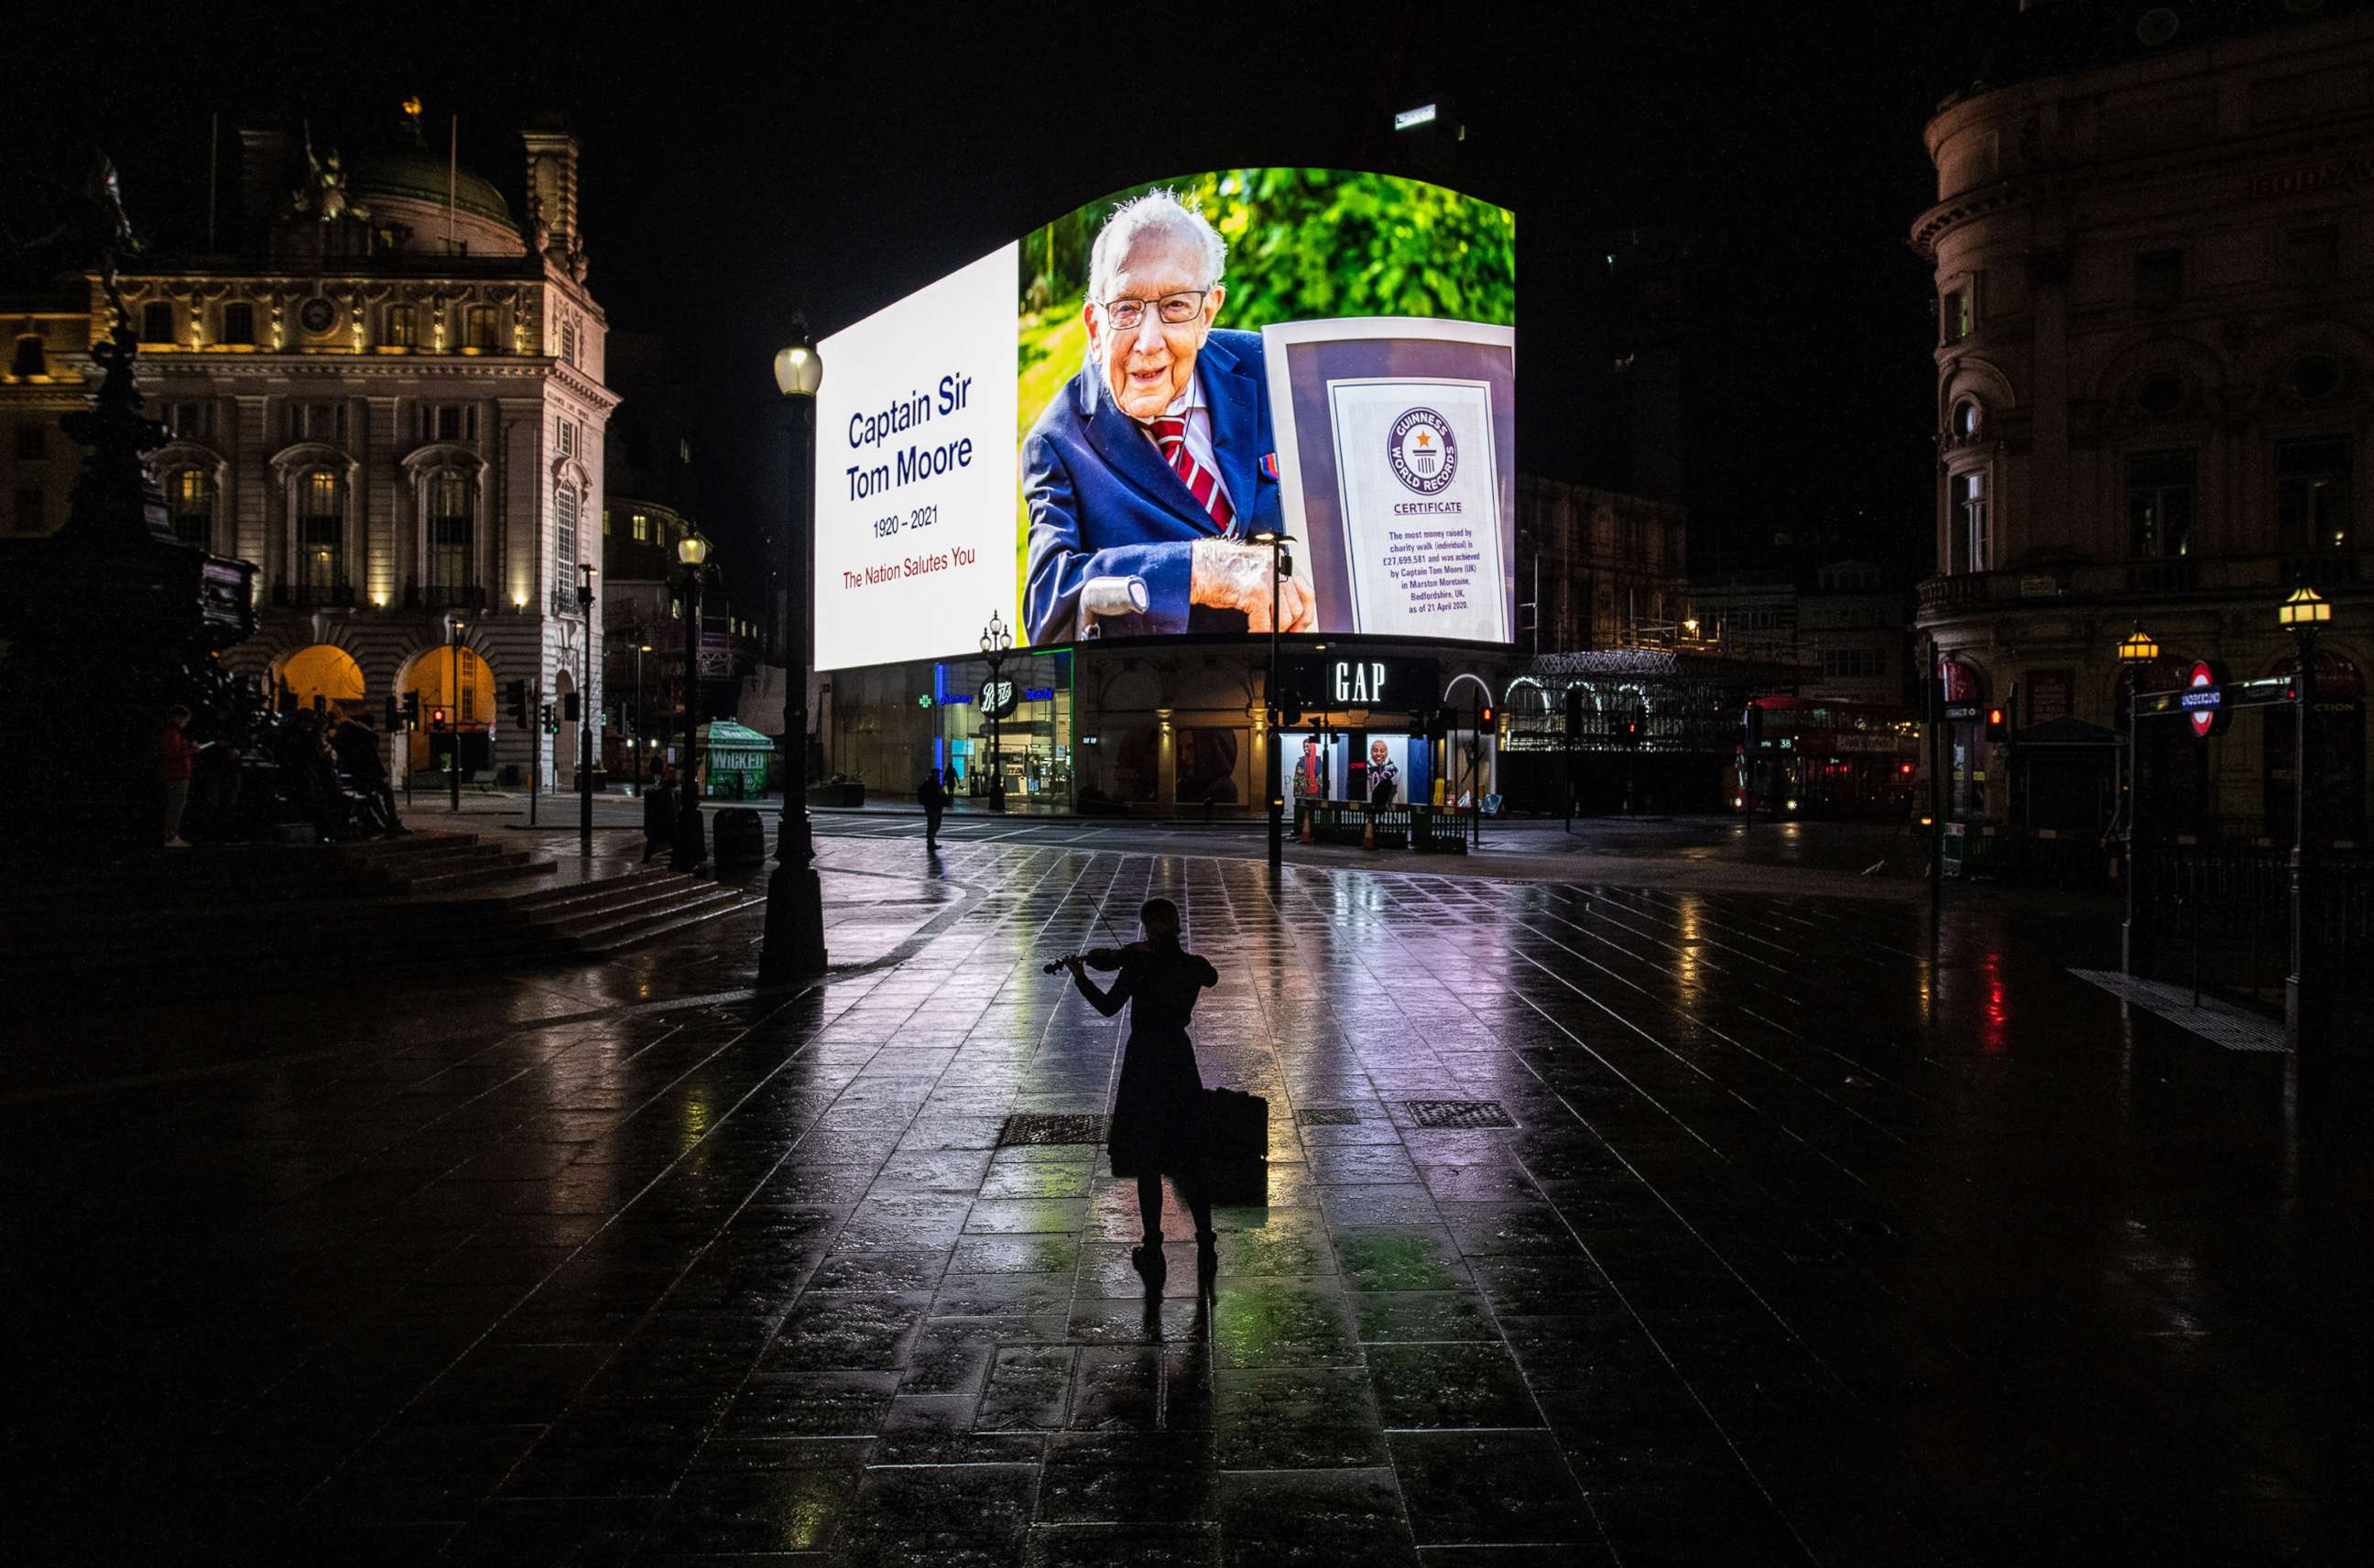 PHOTO: A violinist plays in front of a tribute to Captain Sir Tom Moore that is displayed at Piccadilly Circus shortly after it was announced that he has died on Feb. 2, 2021 in London.